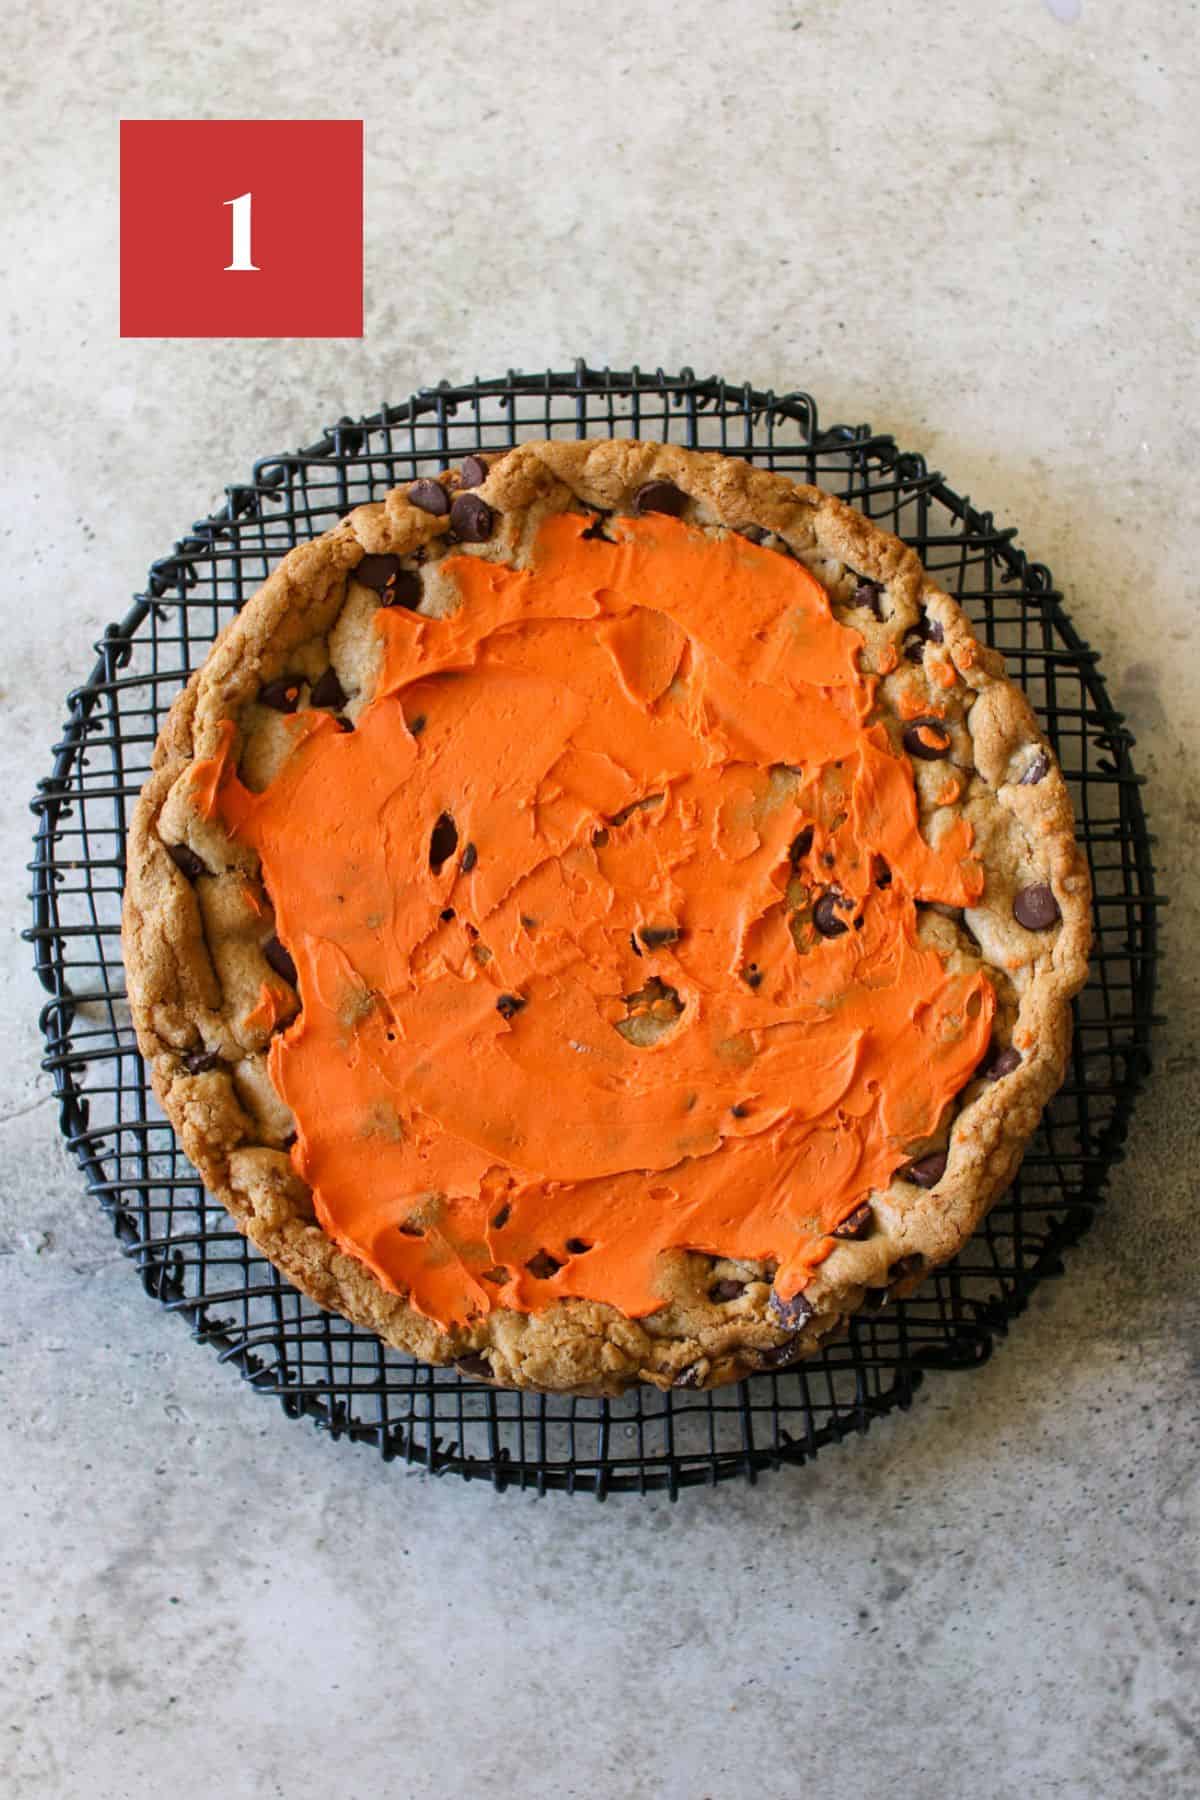 A cookie cake on a black wire trivet on cement background. The cookie cake has a thin layer of orange frosting. In the upper left corner is a dark red square with a white '1' in the center.